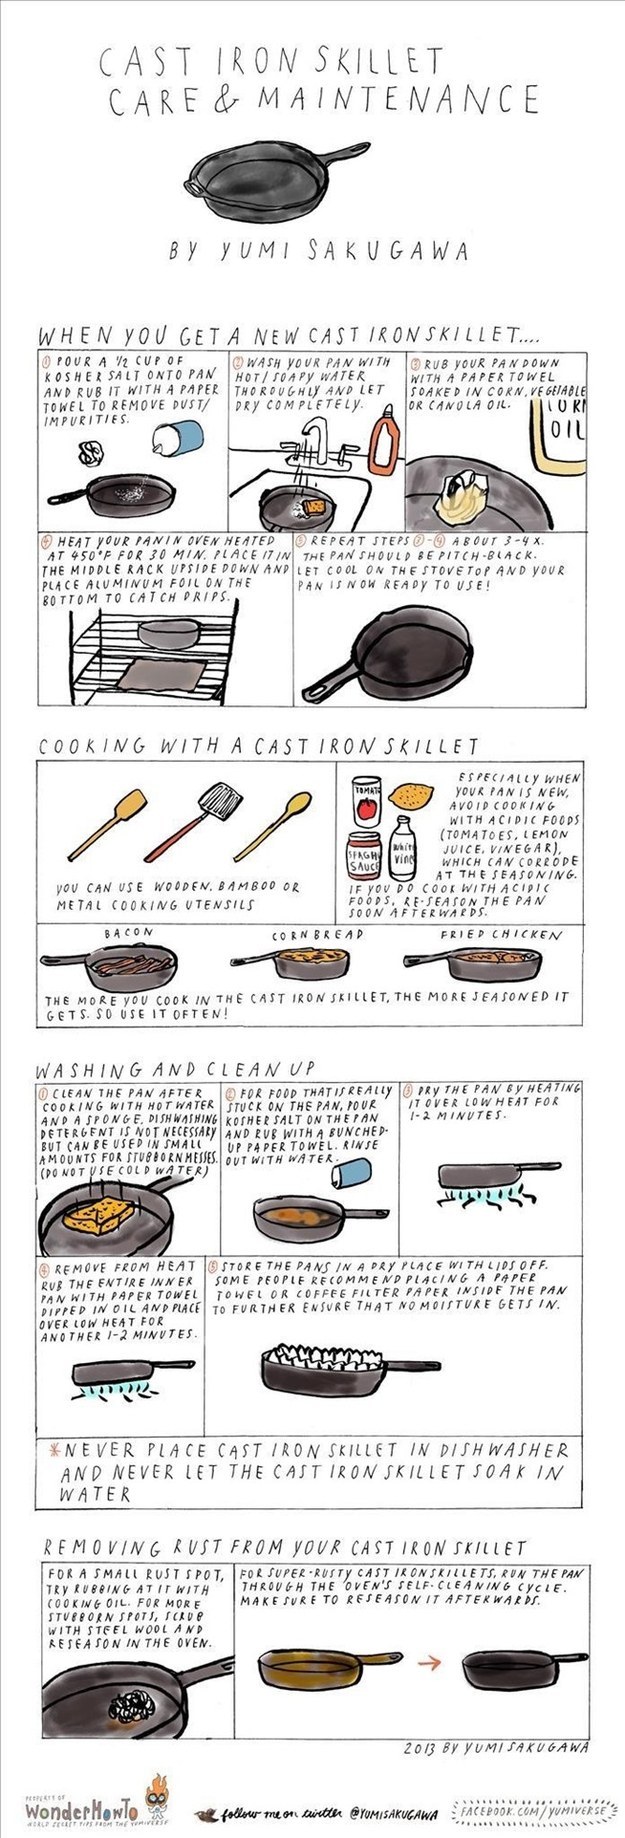 9. For cooking with and maintaining a cast iron skillet.